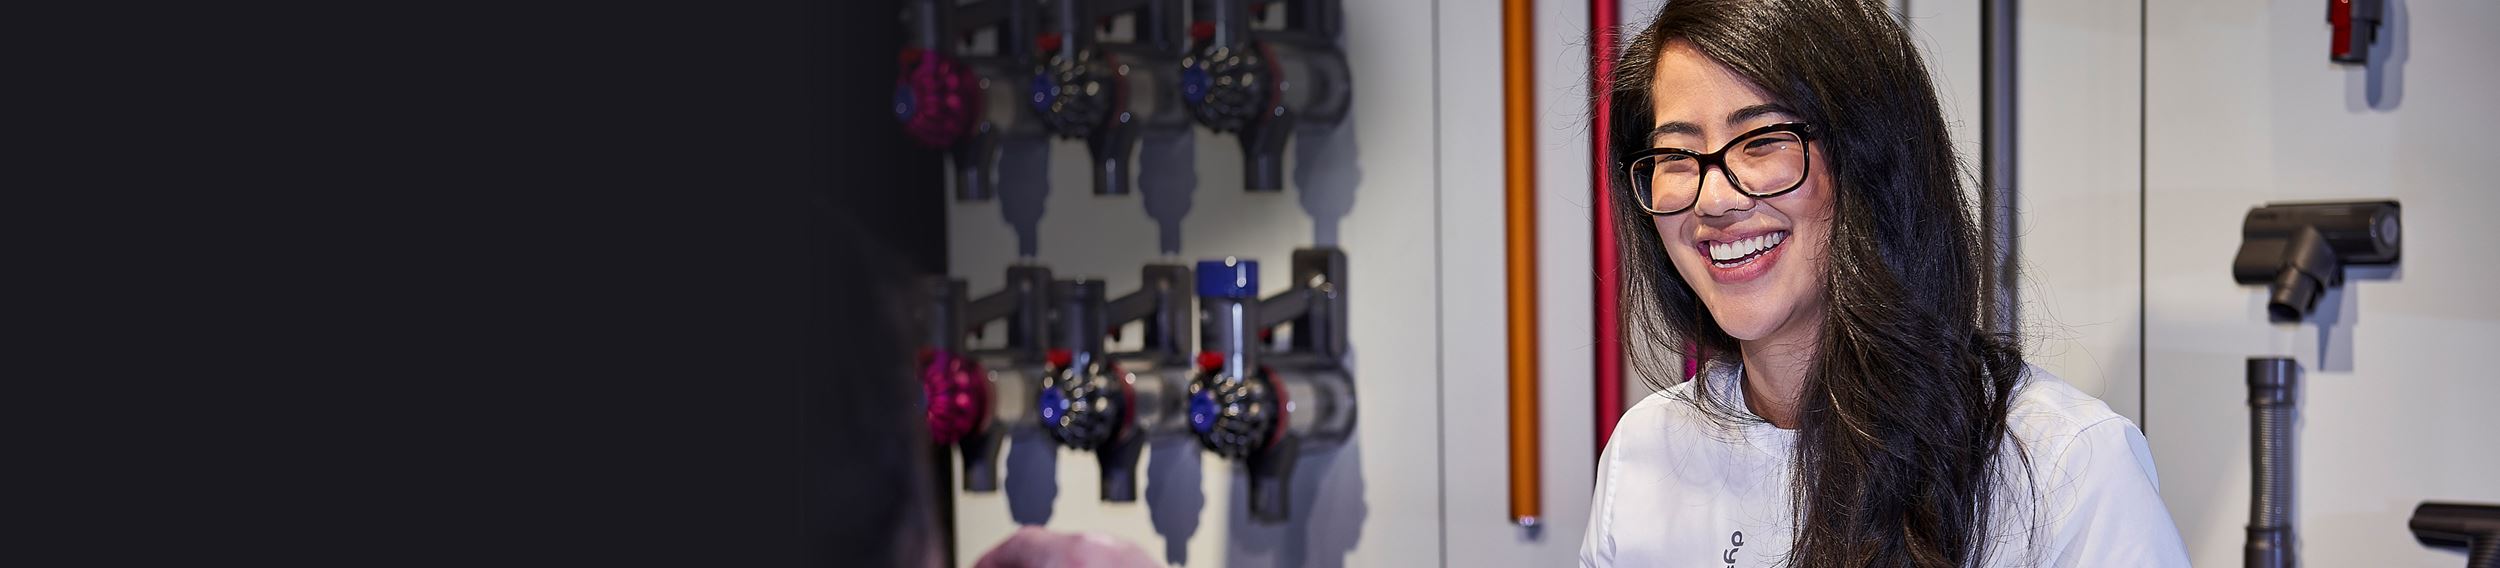 Image of Dyson expert demo